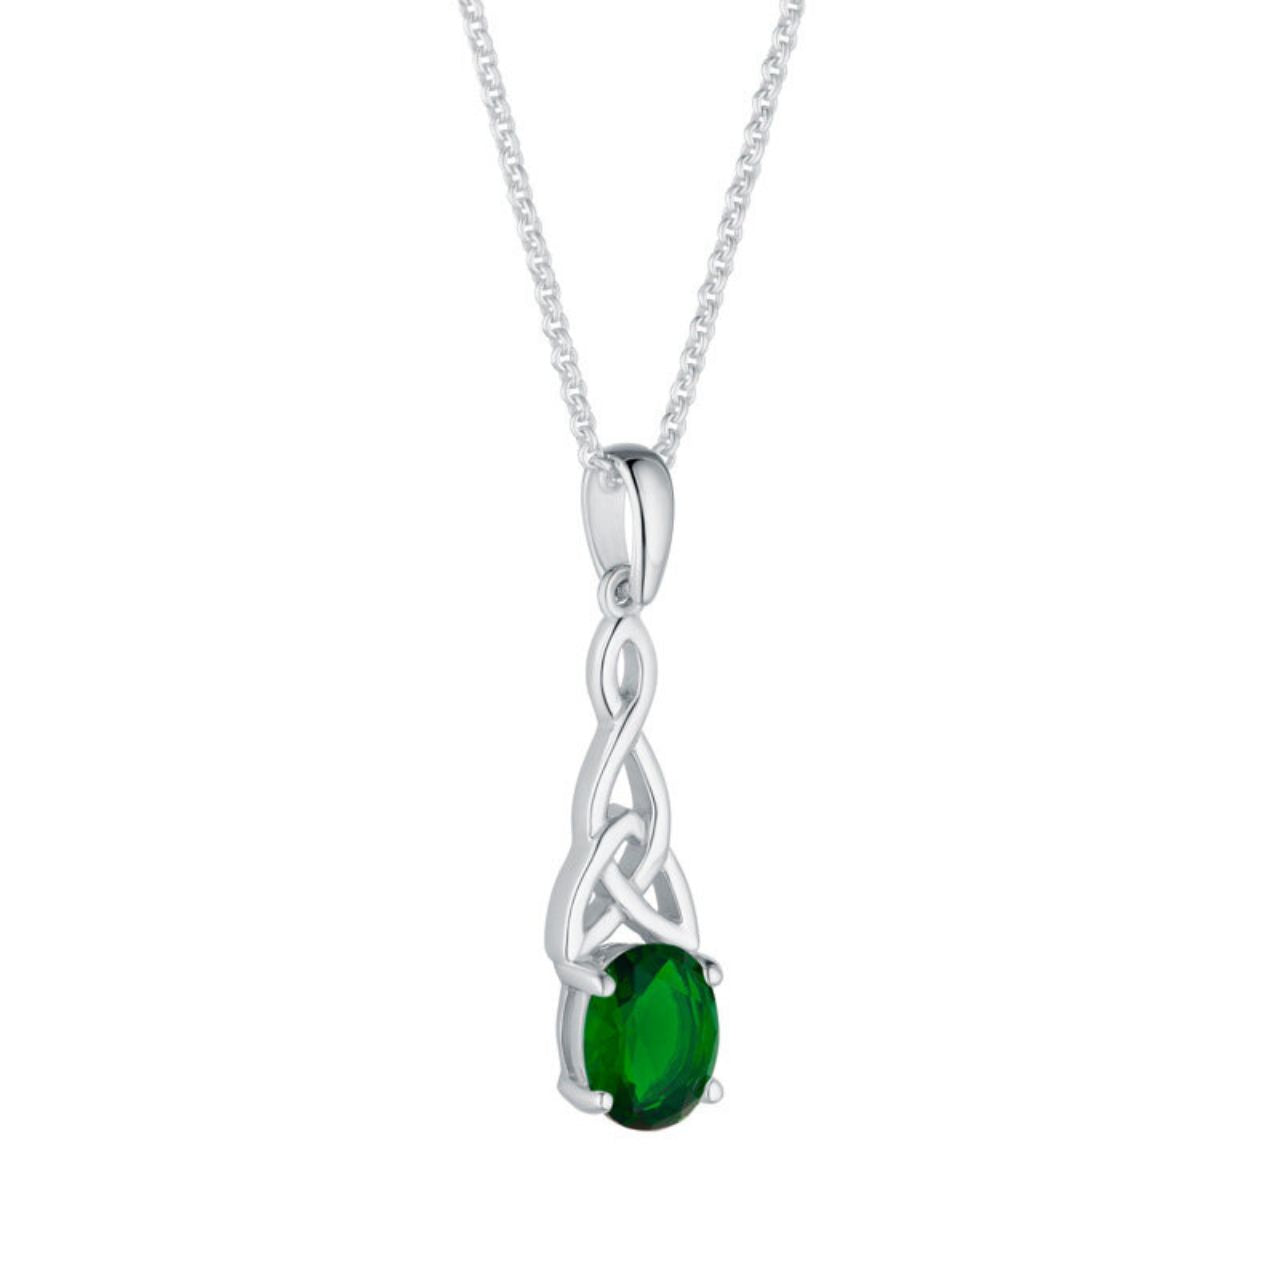 This sterling silver pendant brings both style and substance. The Trinity Knot symbol is deeply meaningful, its lack of ending or beginning representing the eternal nature of the human spirit. The oval-shaped green cubic zirconia is a nod to the Emerald Isle itself. A beautiful piece that stylishly conveys its Irish heritage.